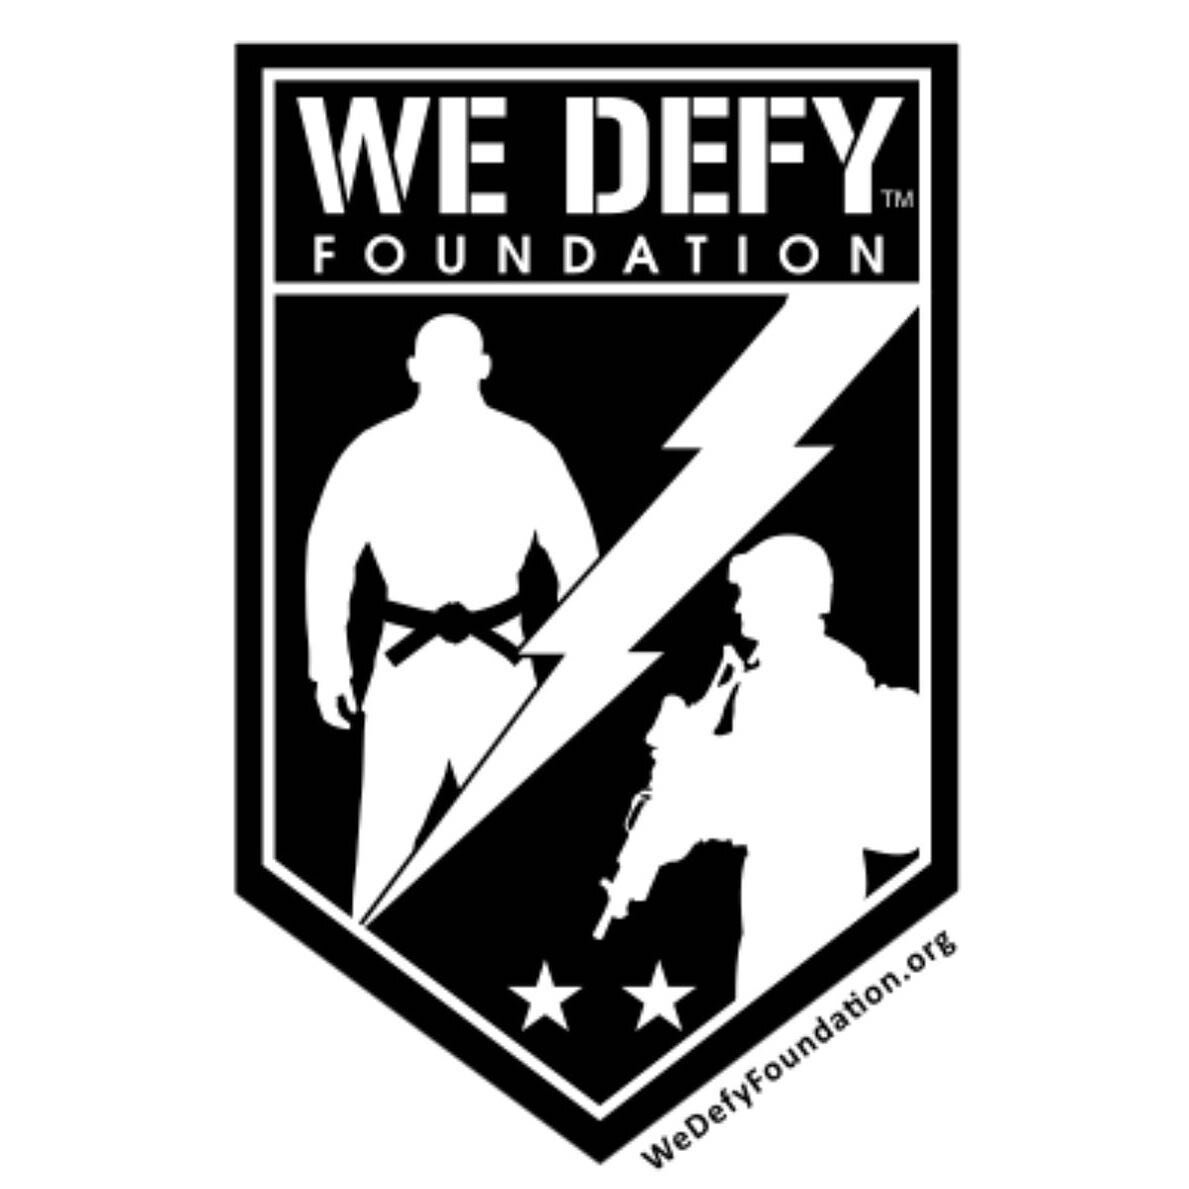 We are happy to announce our partnership with the We Defy Foundation!

They provide combat veterans a long term means to overcome their challenges through Jiu Jitsu and fitness training!

If you or someone you know would benefit from these services, 